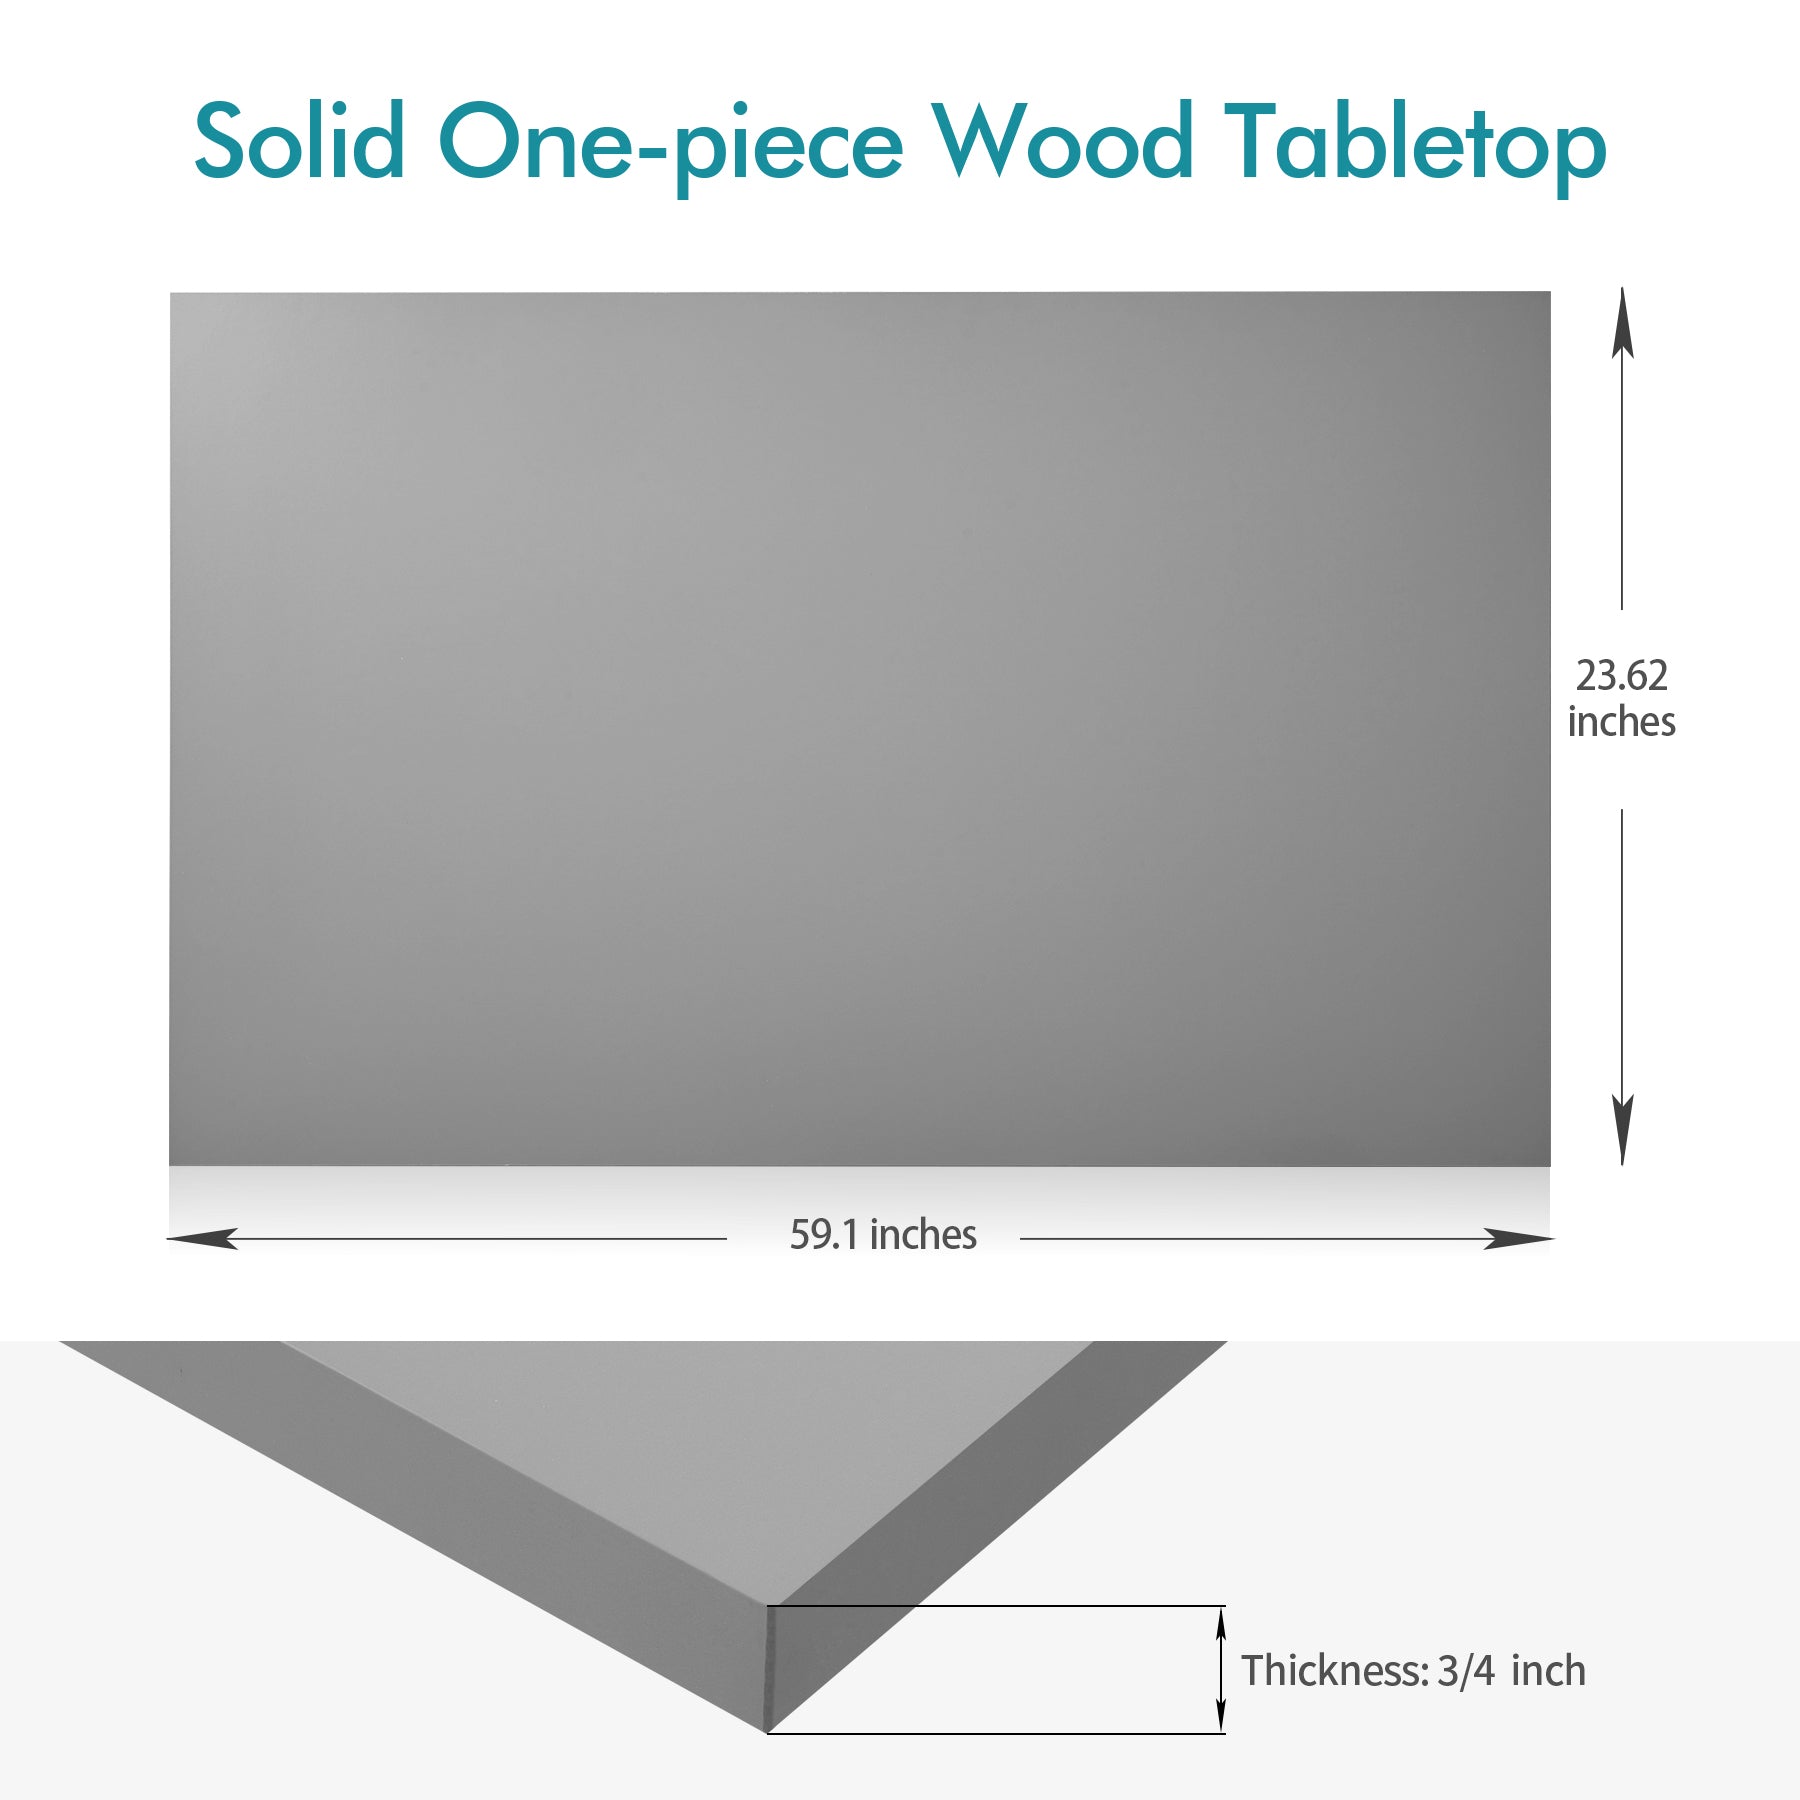 60x24 one-piece wood table top in gray